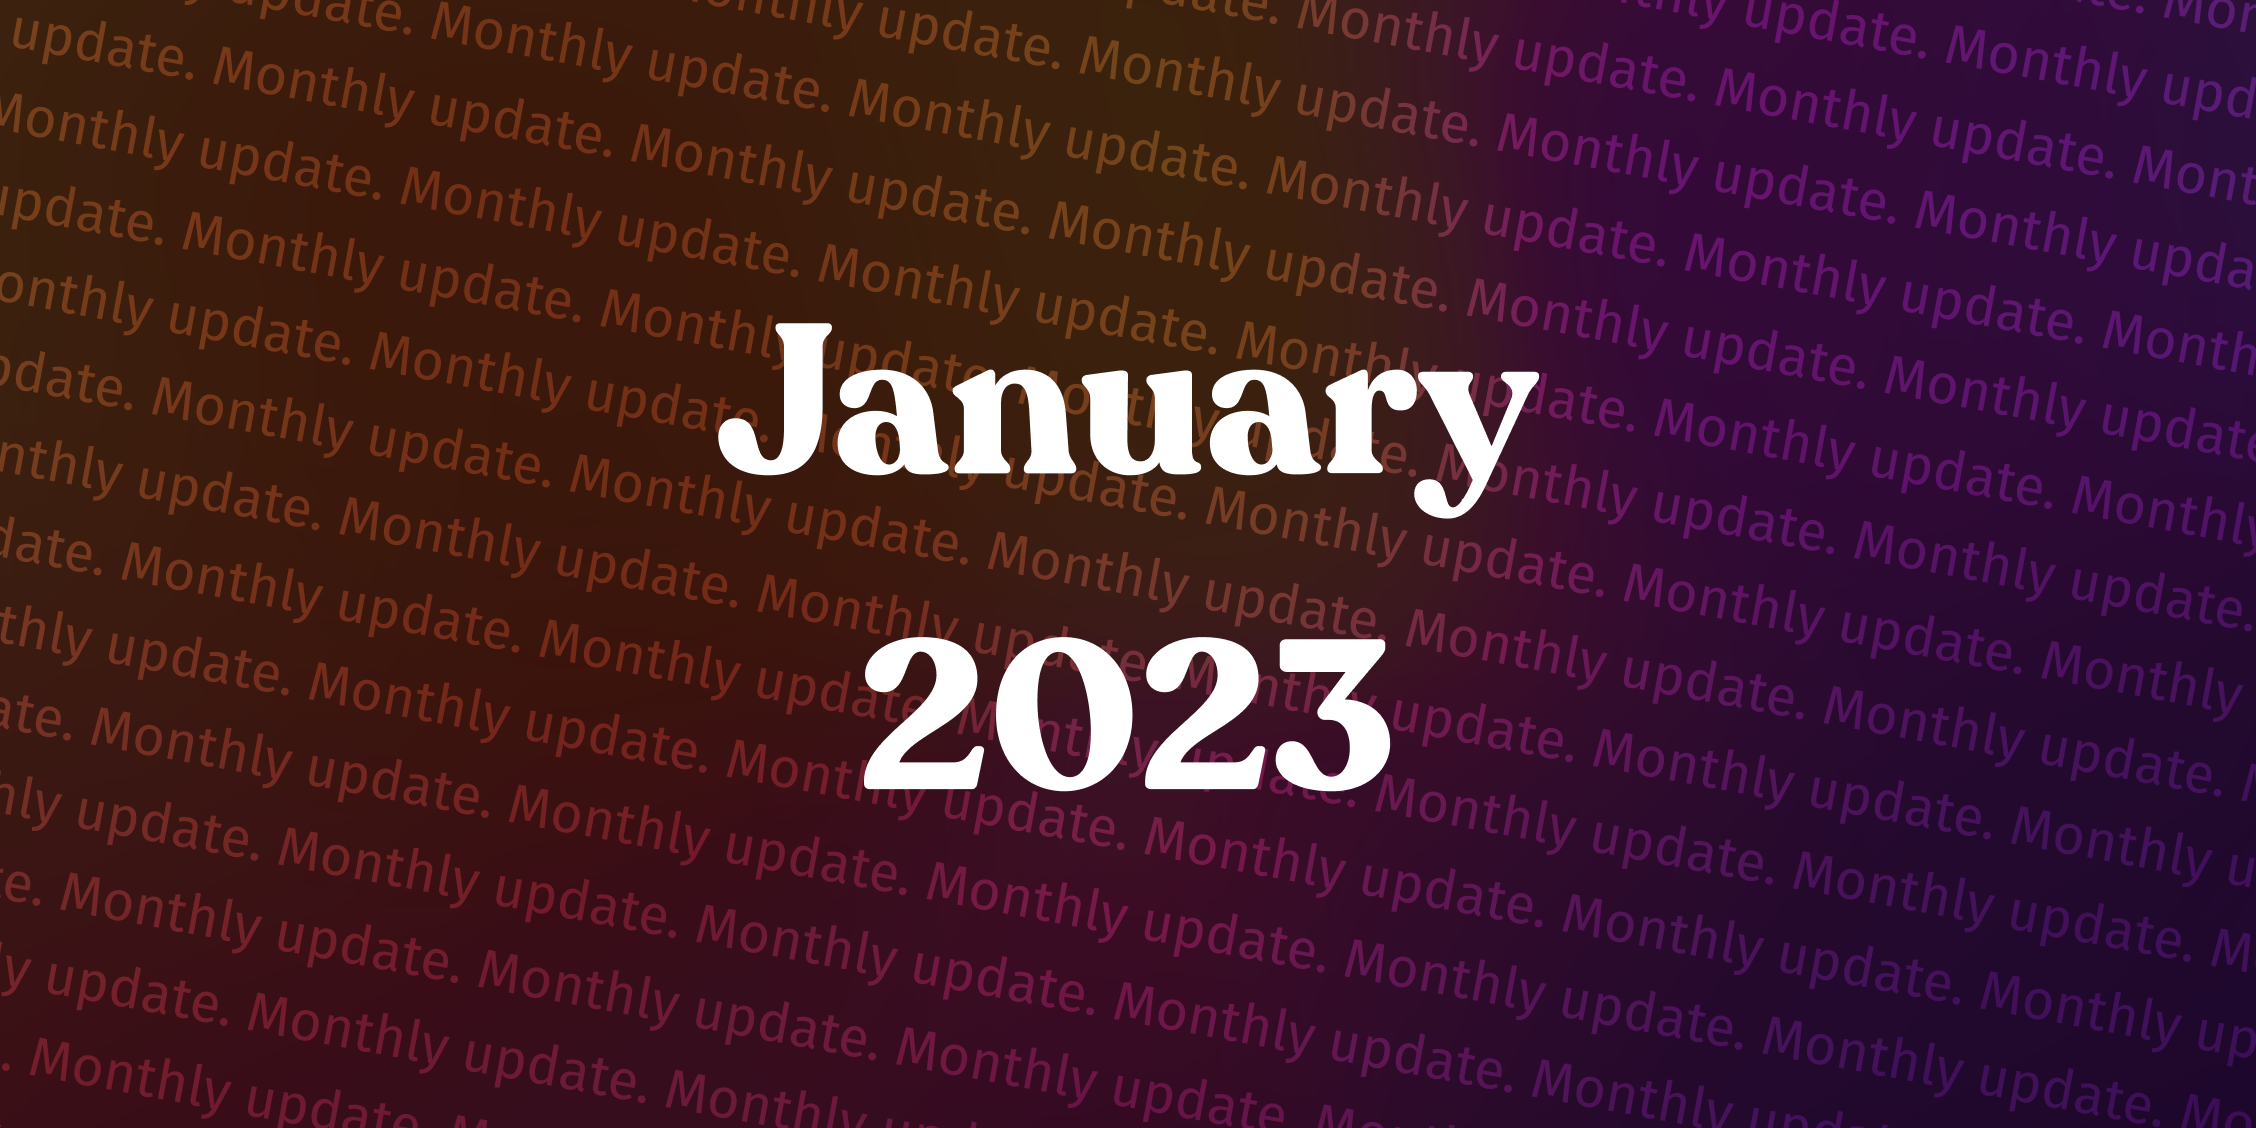 What’s new in Pausly, January 2023